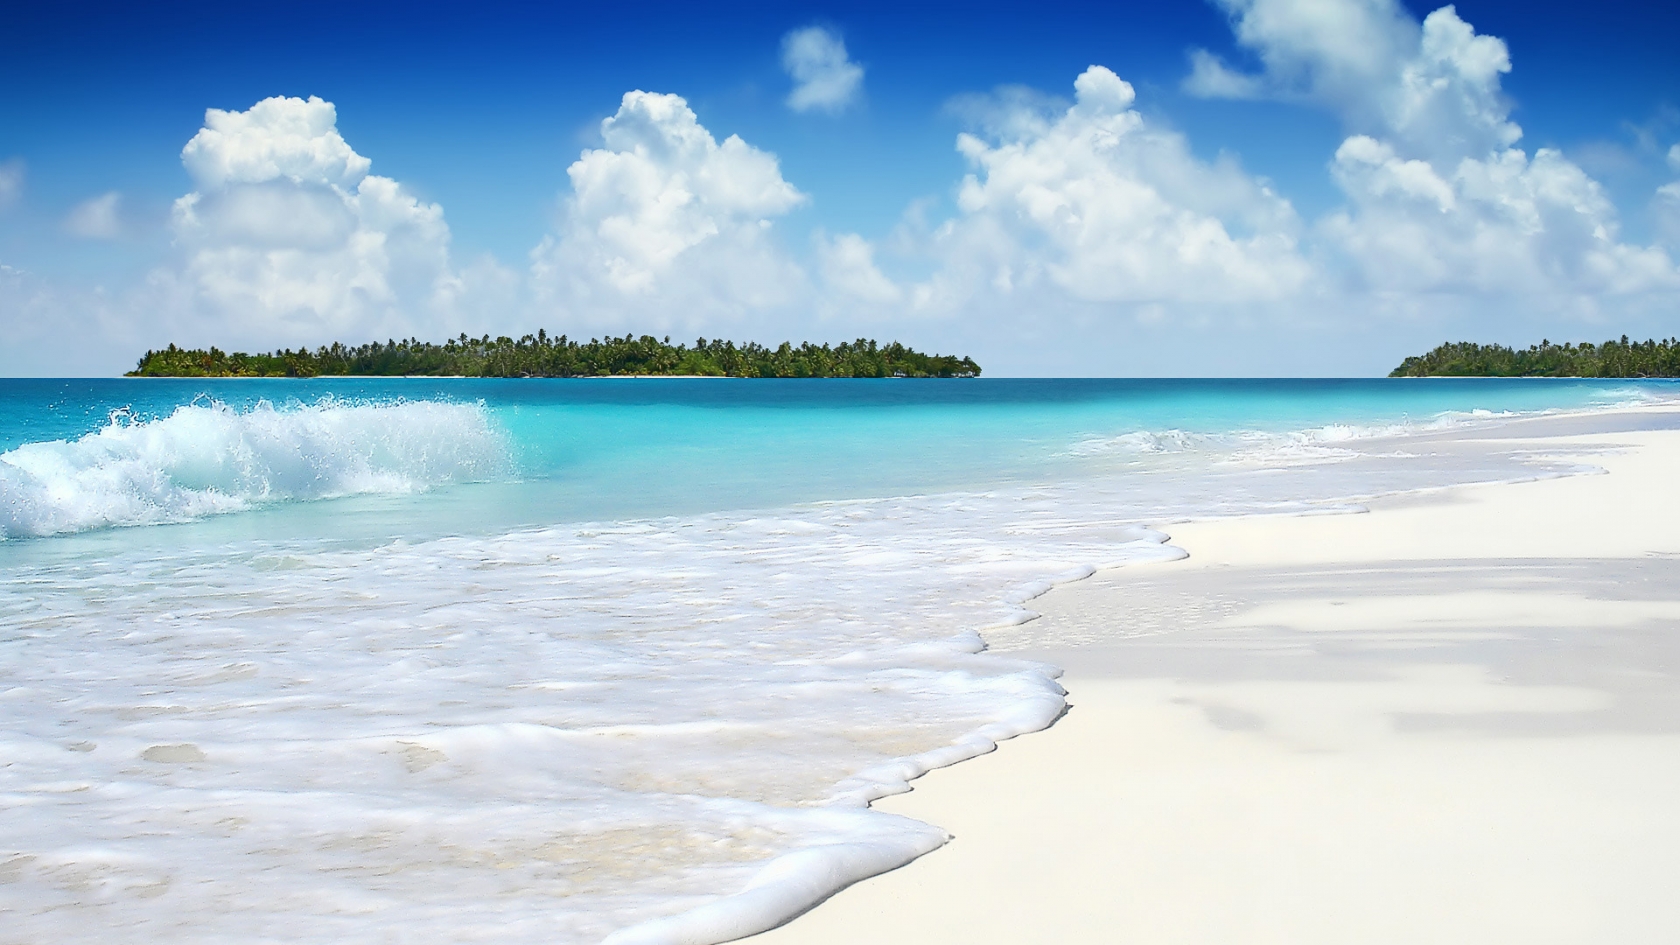 The Beautiful Summer Island for 1680 x 945 HDTV resolution